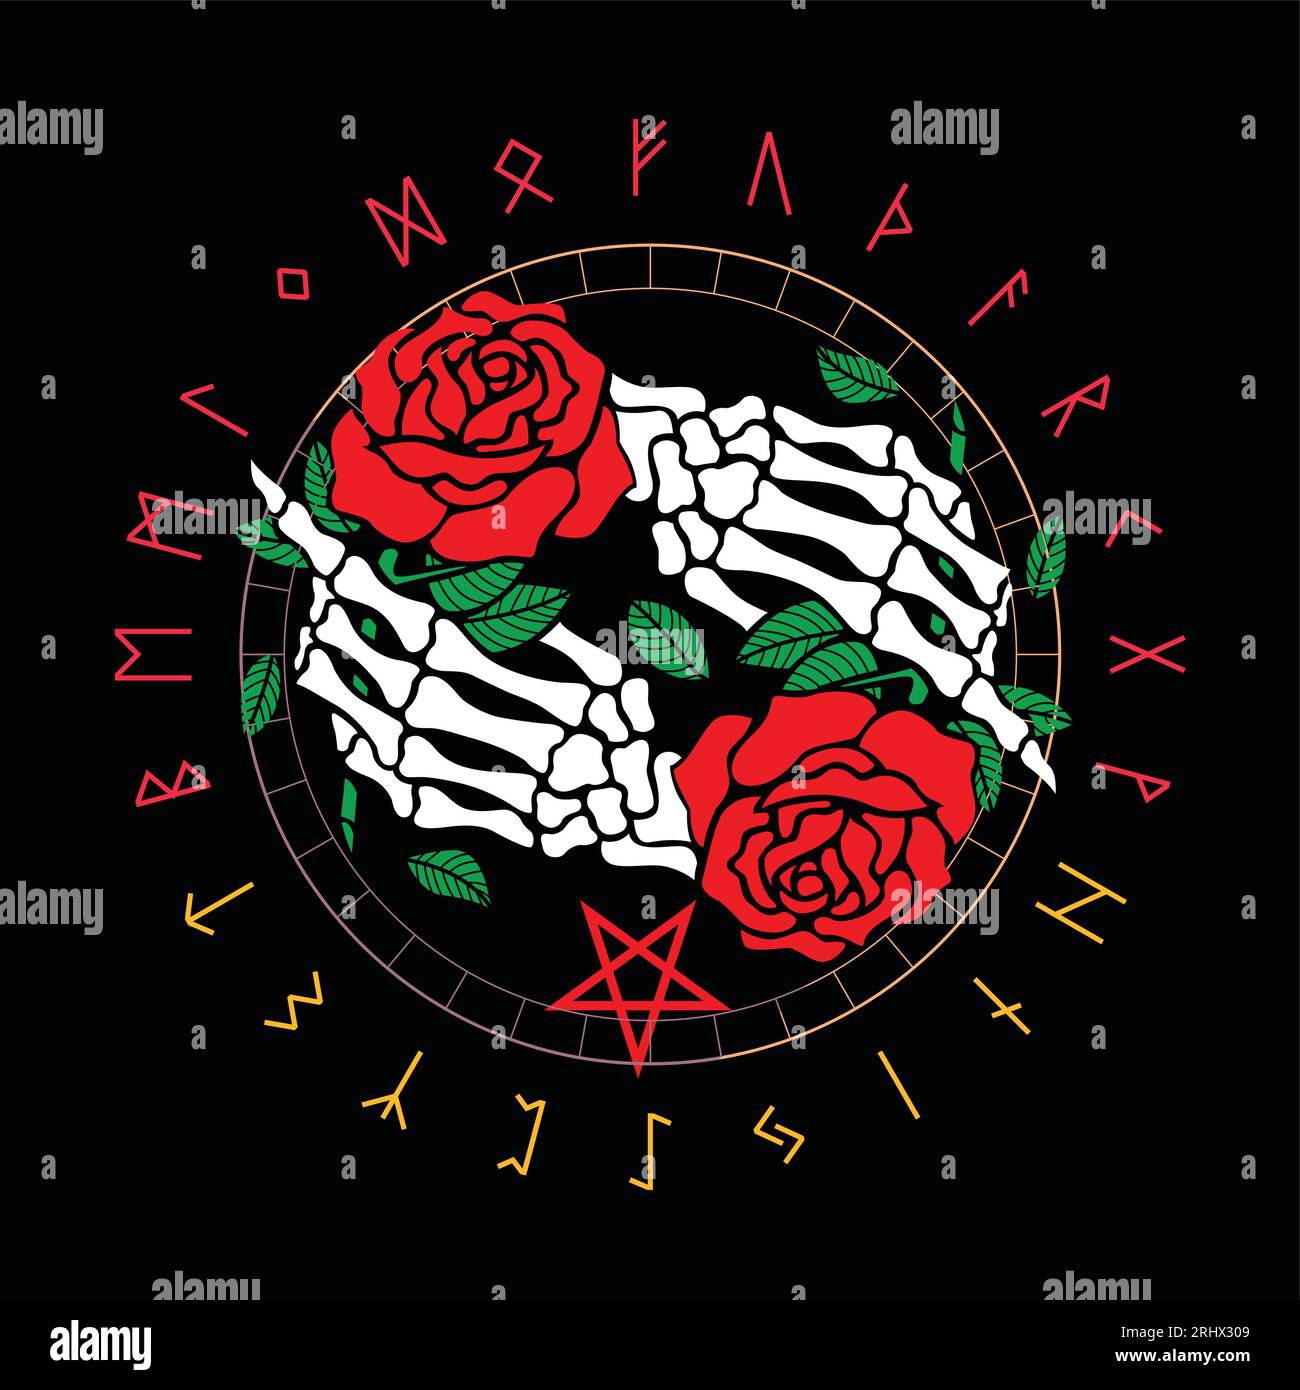 Design for t-shirt with two corpse hands and red roses on a black background. Runic alphabet in circular design. Stock Vector